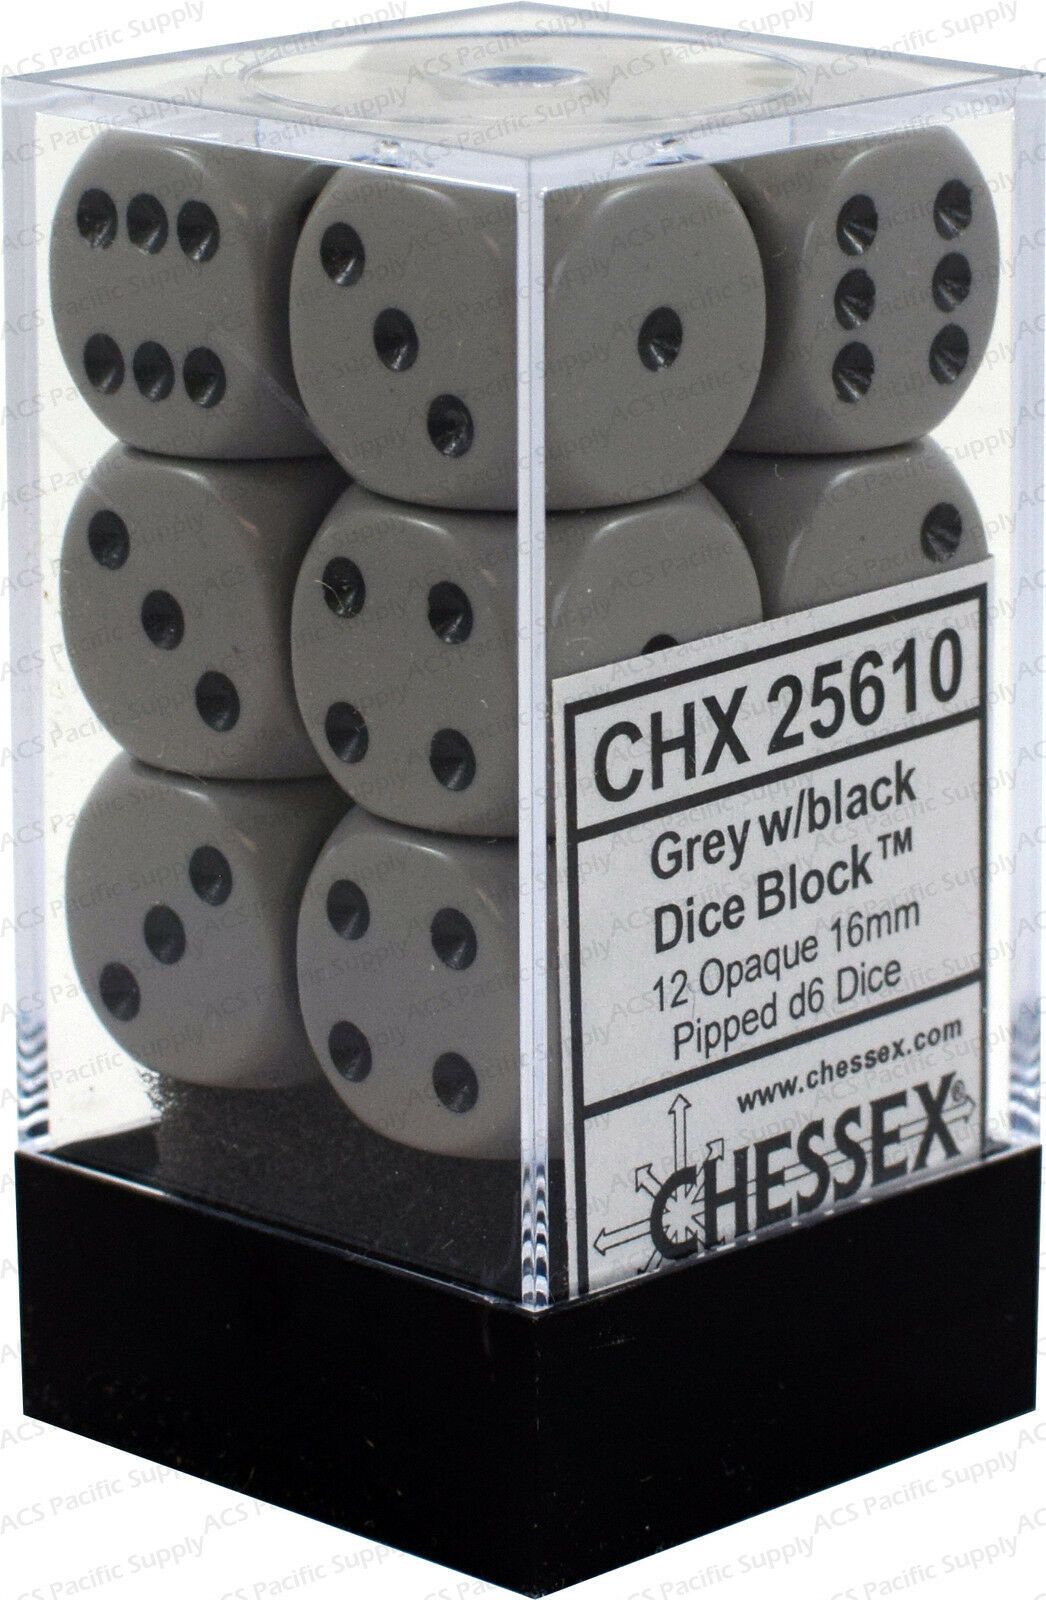 Chessex Dice: D6 Block 16mm - Opaque - Grey with Black (CHX 25610) - Gamescape